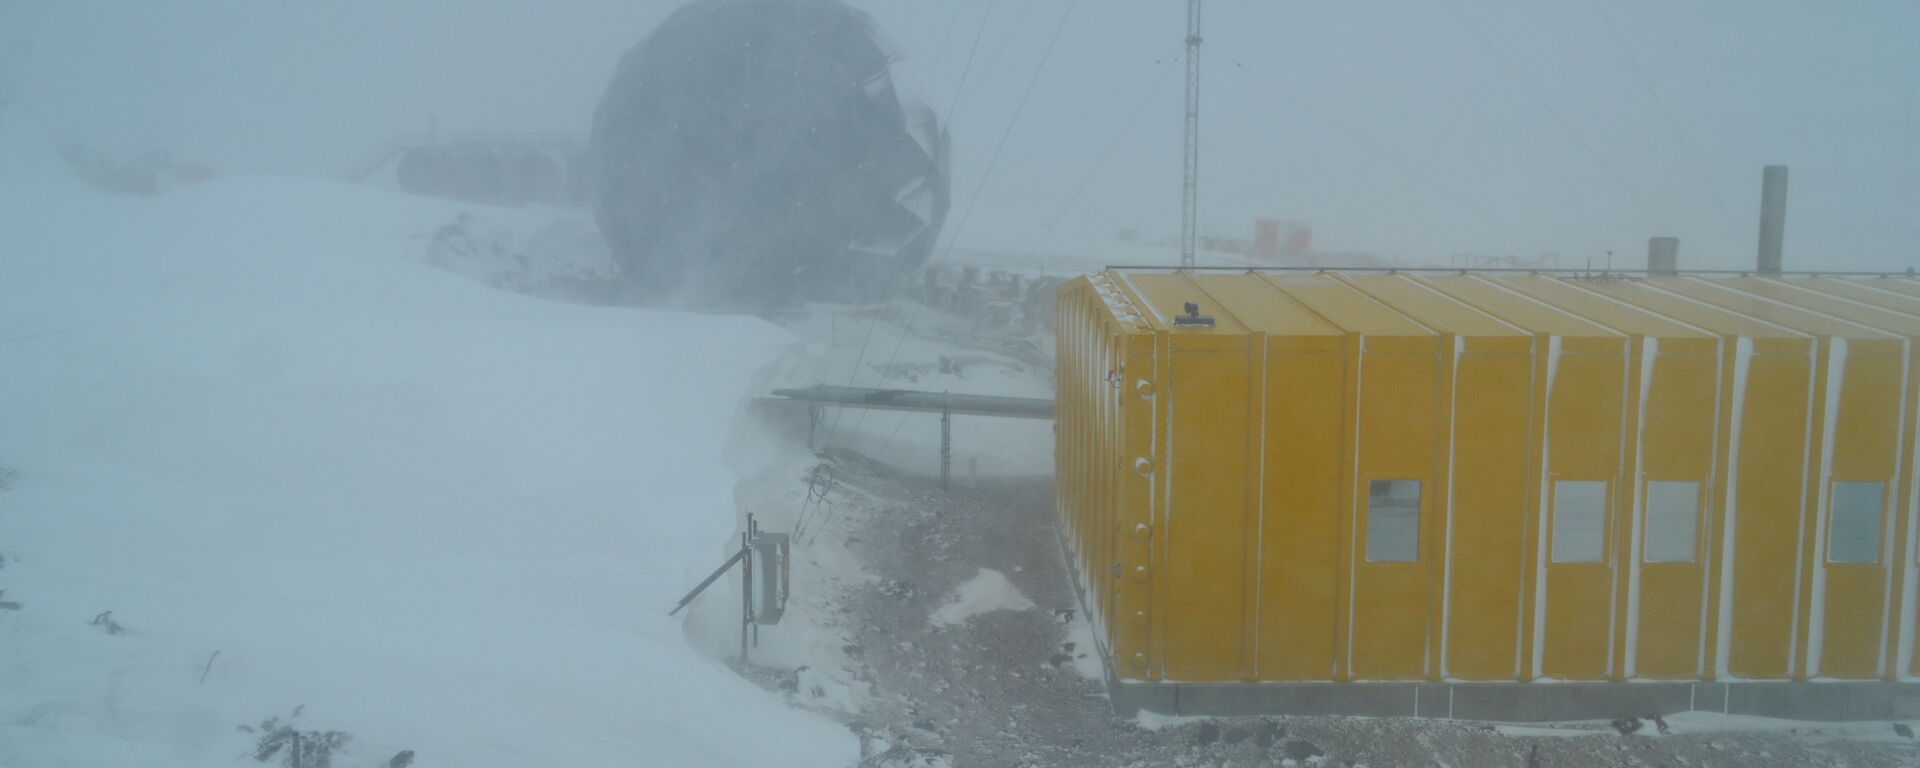 The stations communication satellite dome and operations building in poor weather conditions